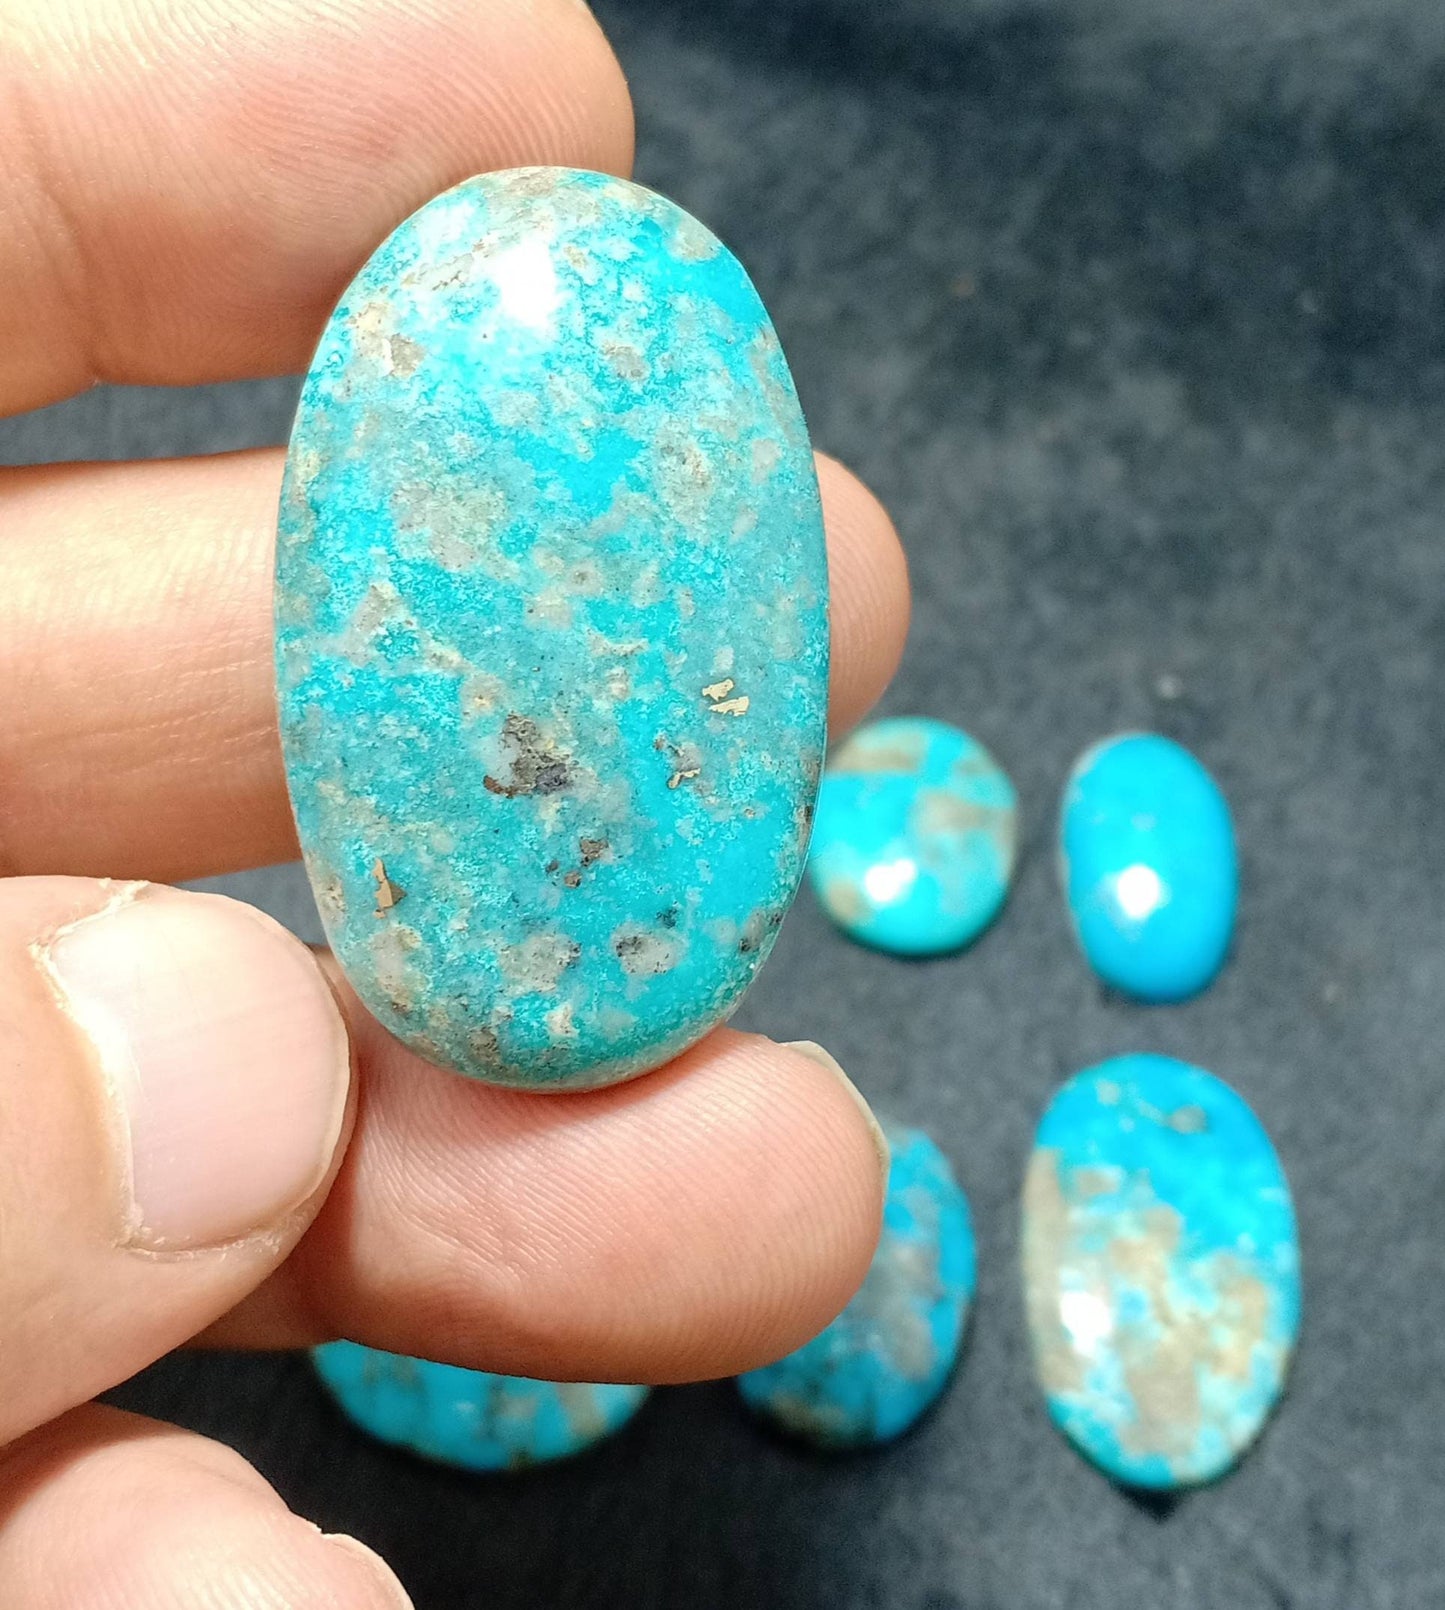 An amazing  lot of 8 turquoise Cabochons 51 grams